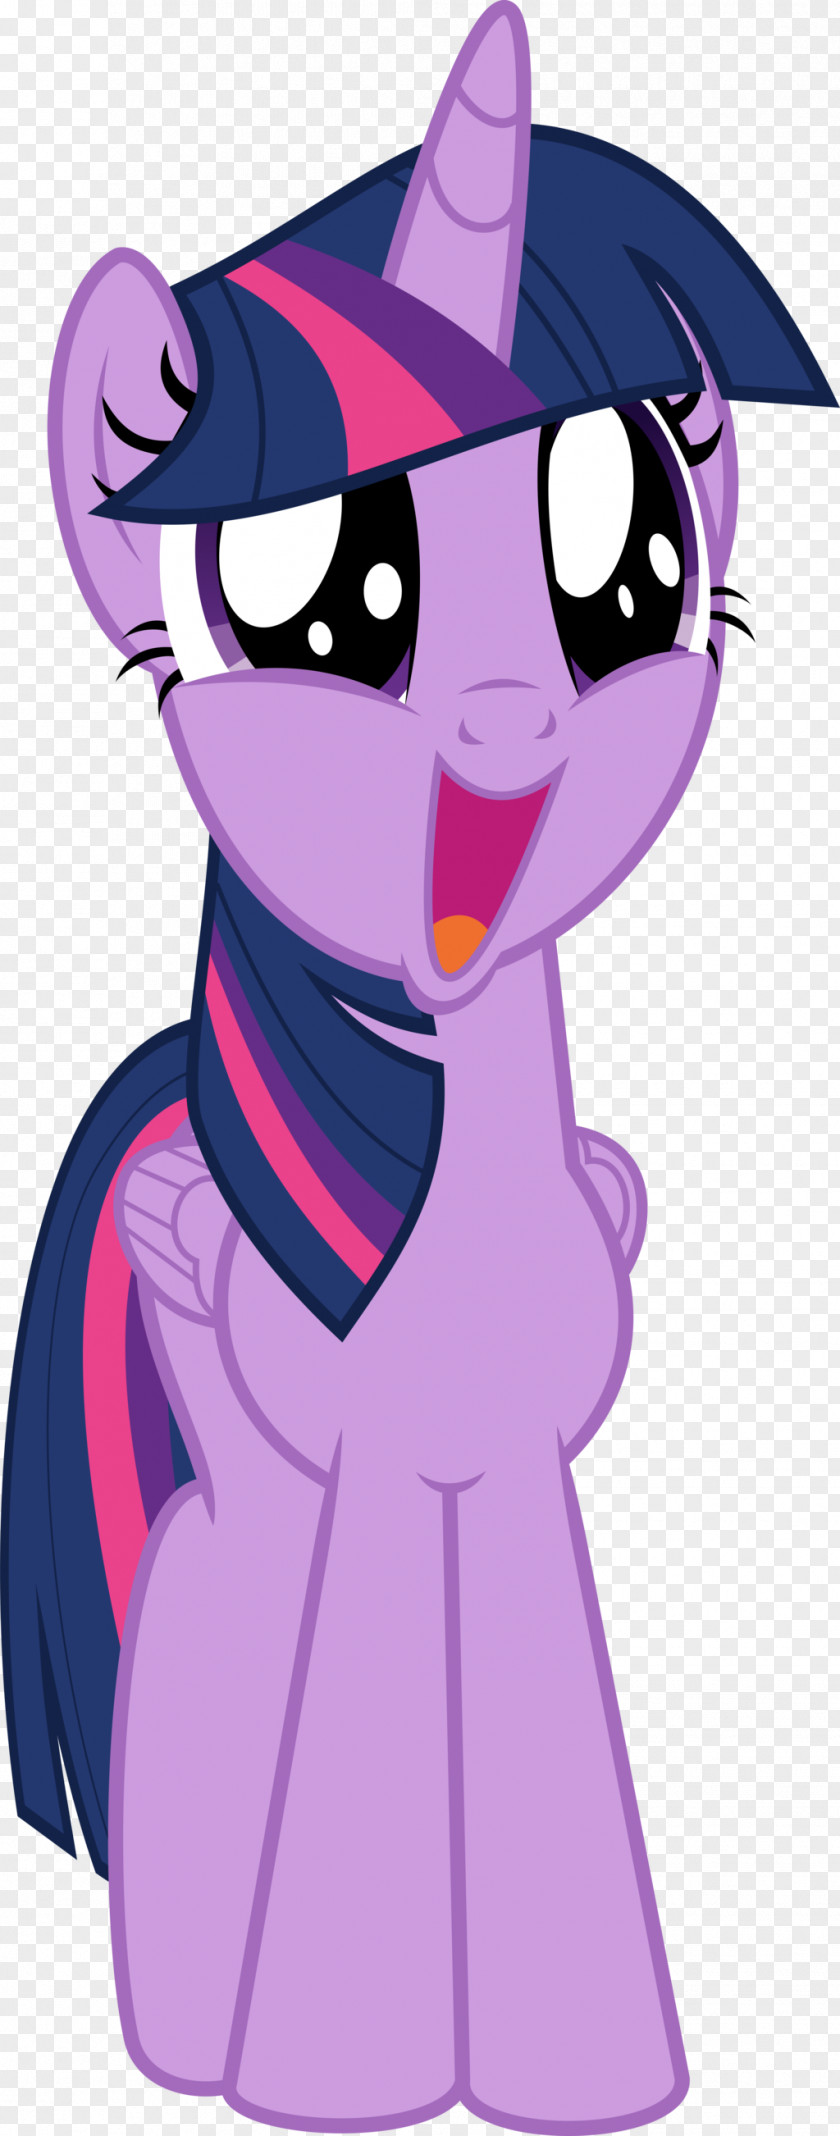 Twilight Sparkle Pinkie Pie Whiskers Rarity Art PNG